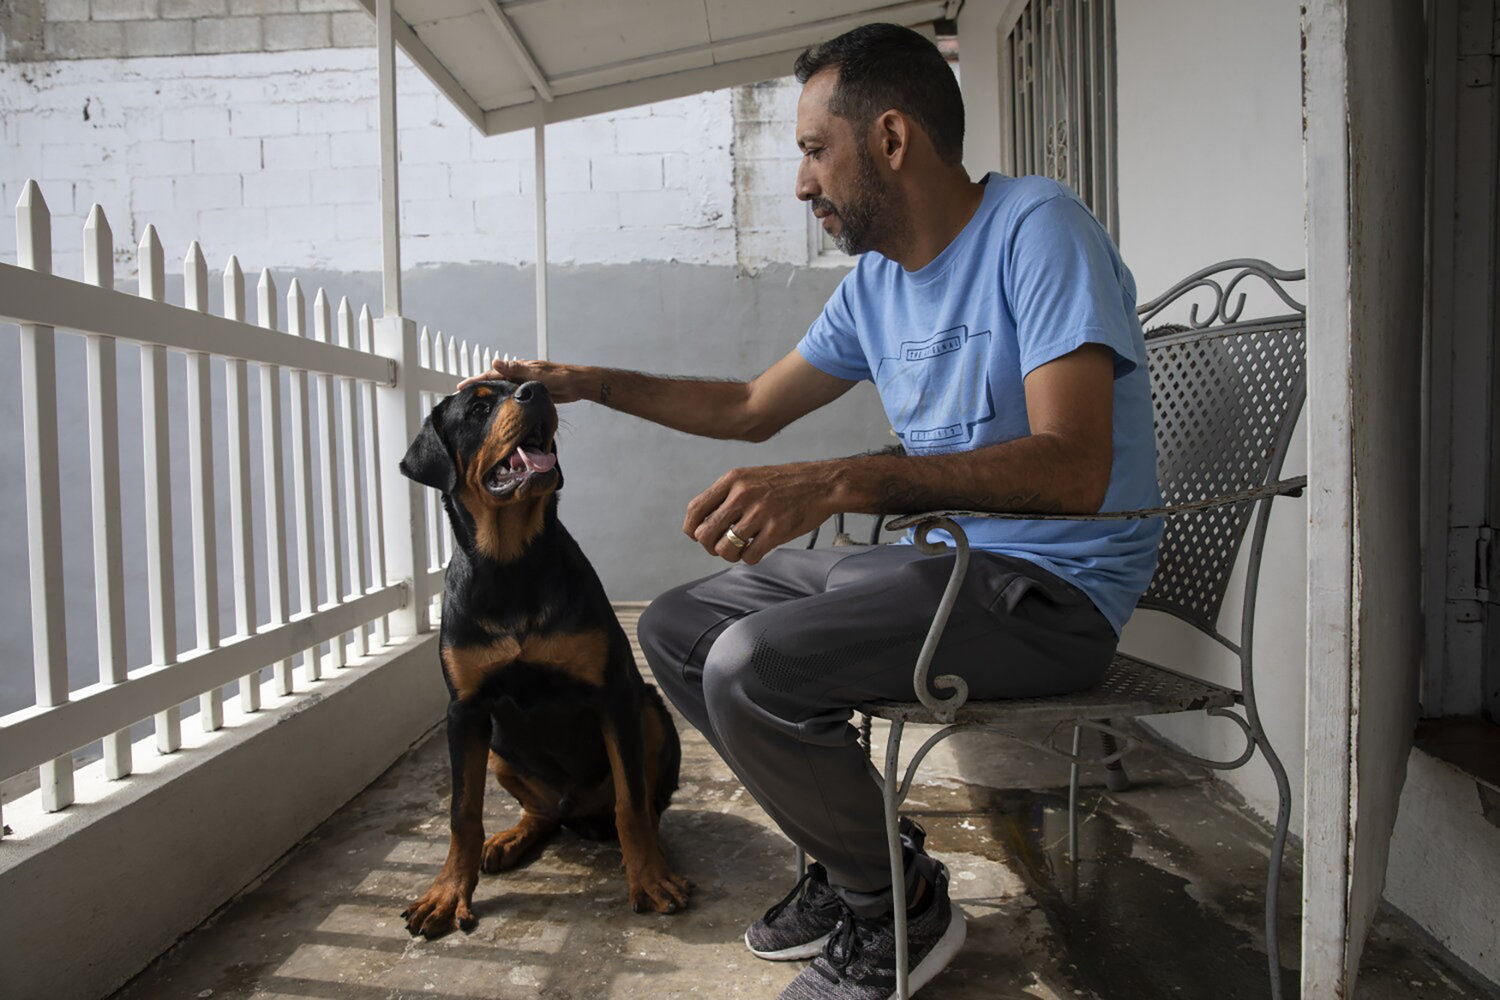 Eduardo Sanchez was recently deported to Tijuana after a routine visit with U.S. Immigration and Customs Enforcement. Sanchez had been living in the United States since 2000 with his wife and now has two sons. (Ana Ramirez/San Diego Union-Tribune/TNS)